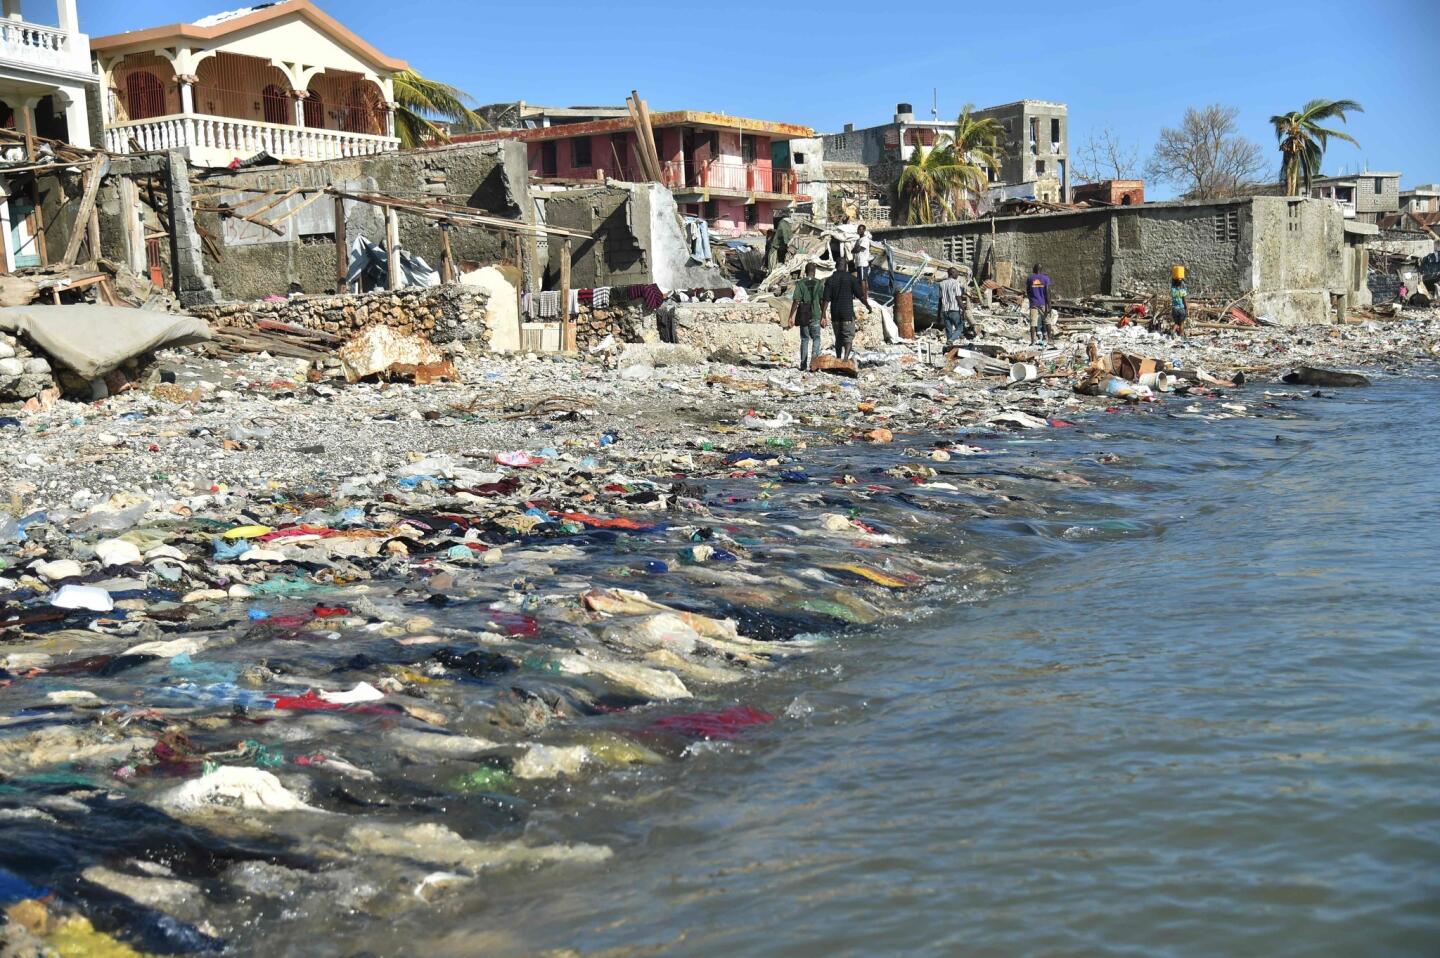 Haitians walk the site of destroyed houses and debris left by Hurricane Matthew in Haiti on Oct. 8, 2016.